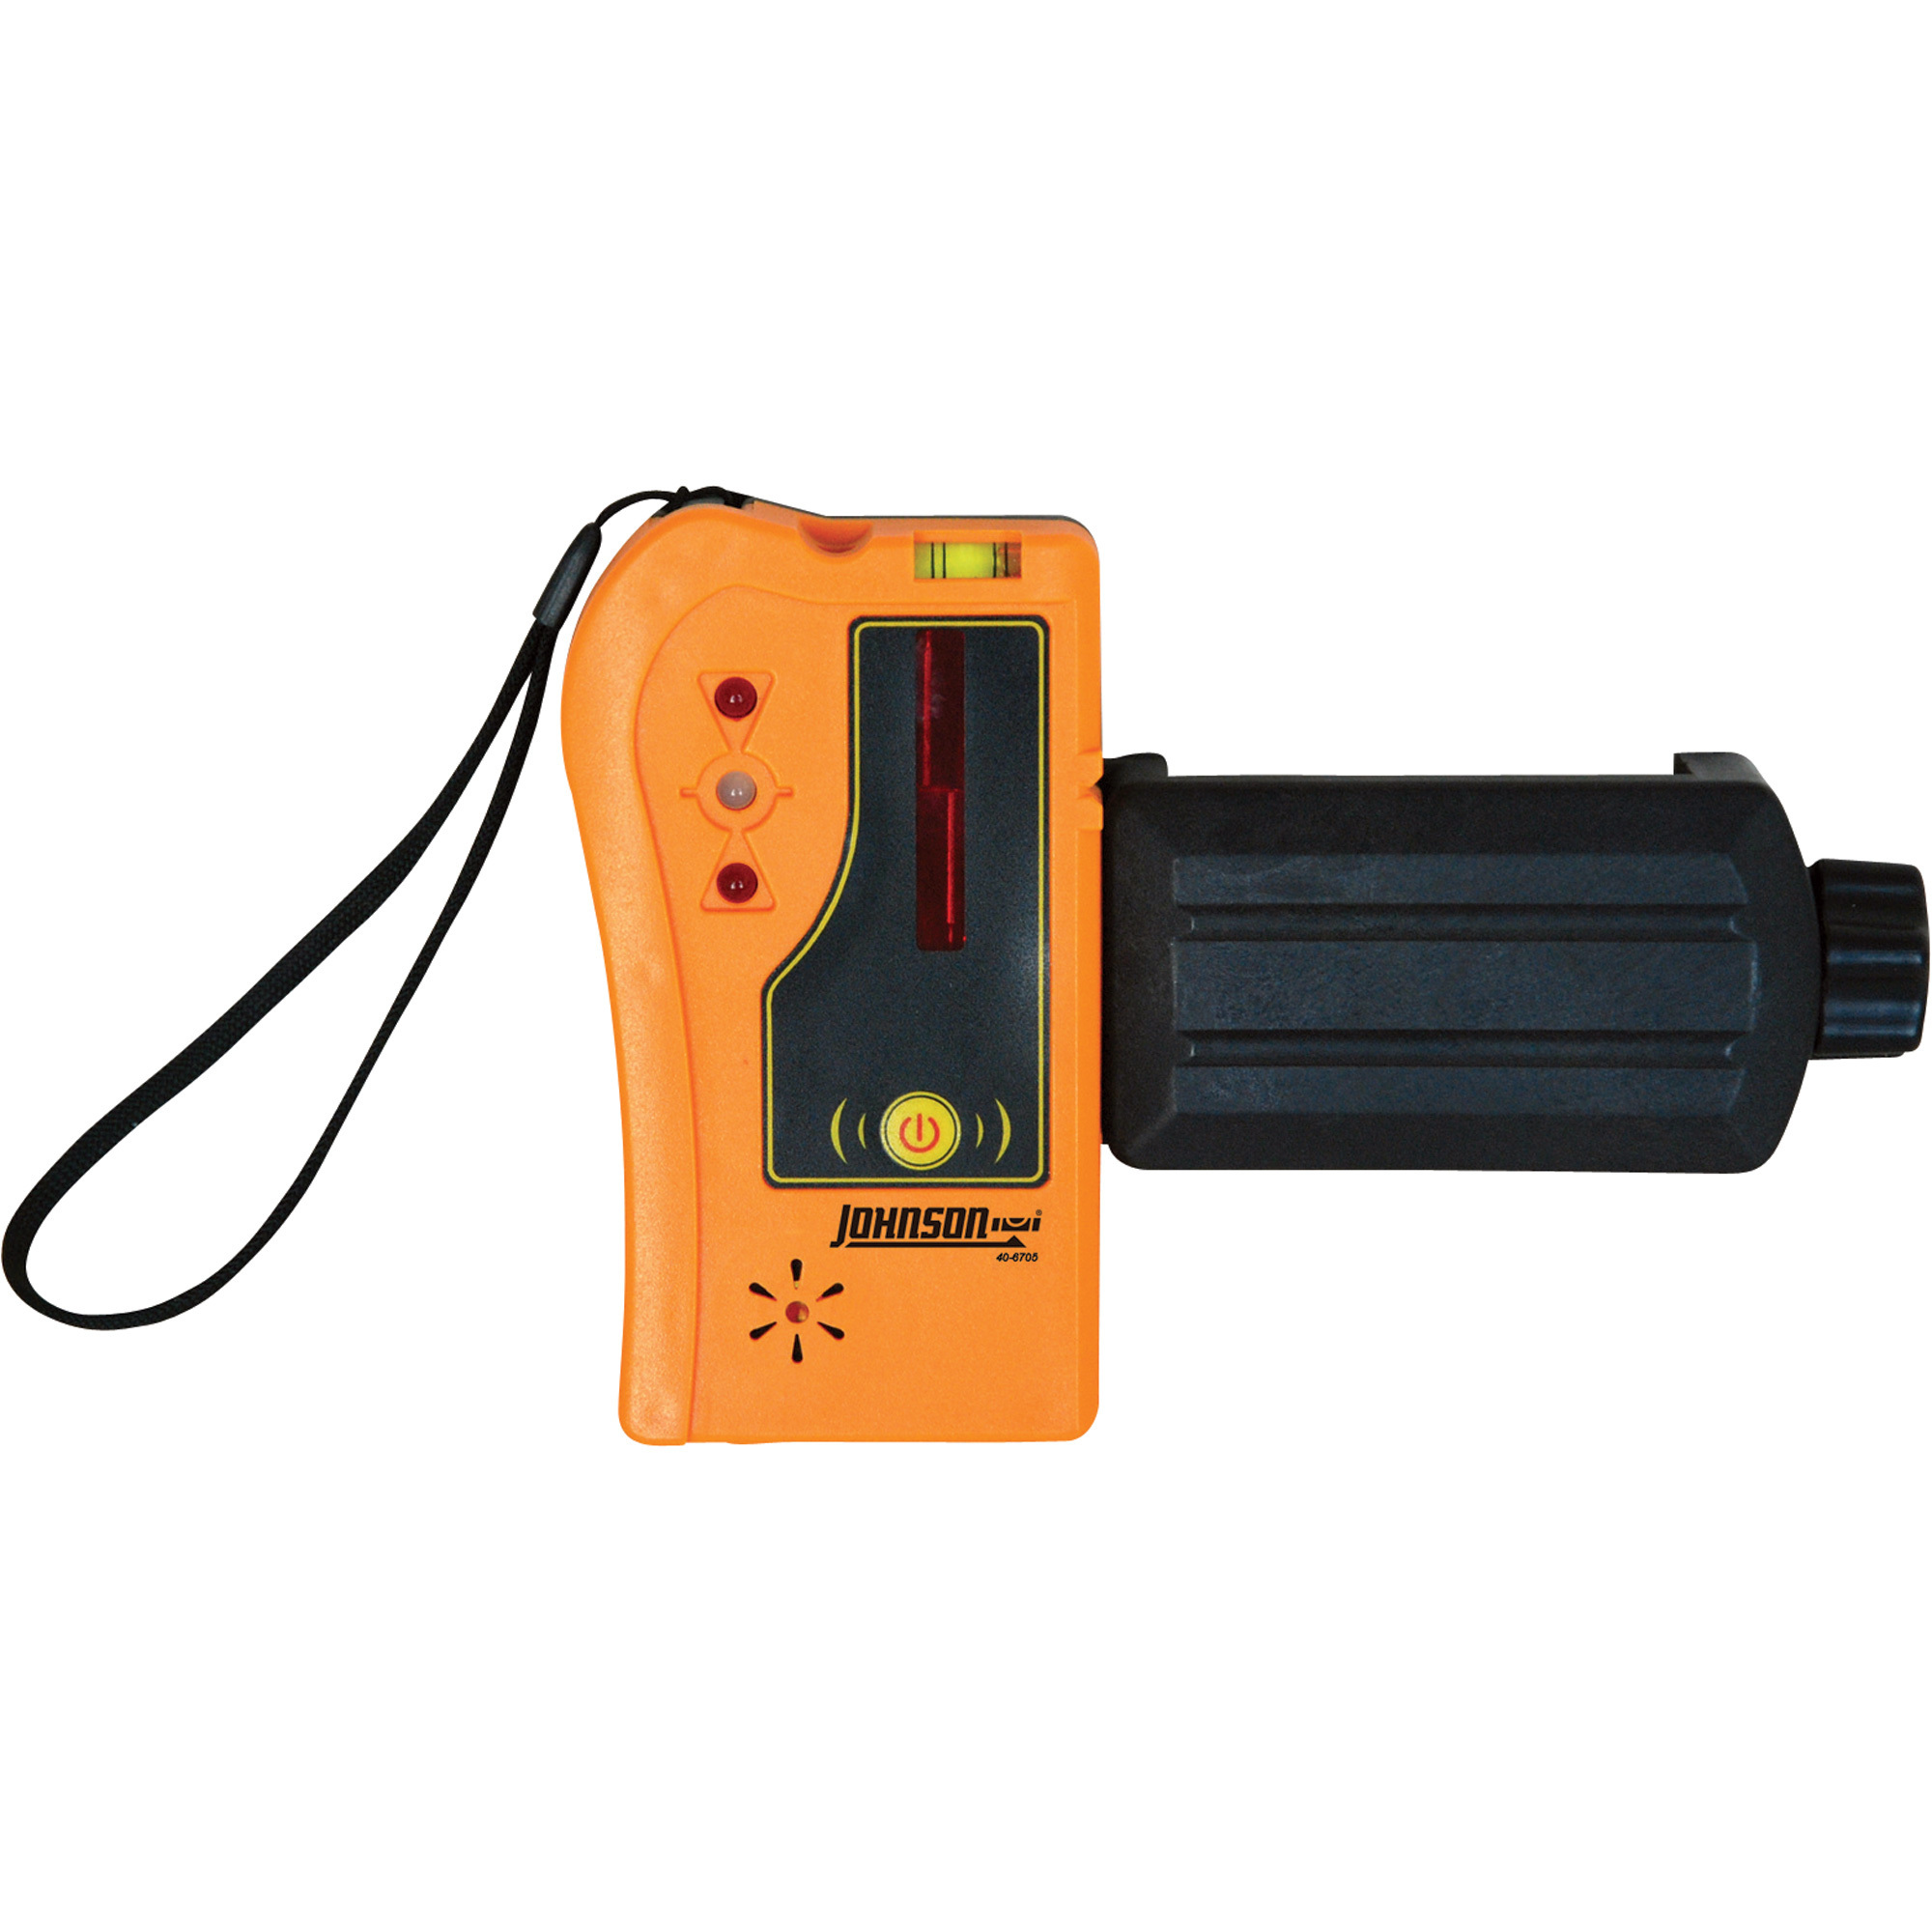 Johnson Level & Tool Laser Detector with Clamp, Model 40-6705